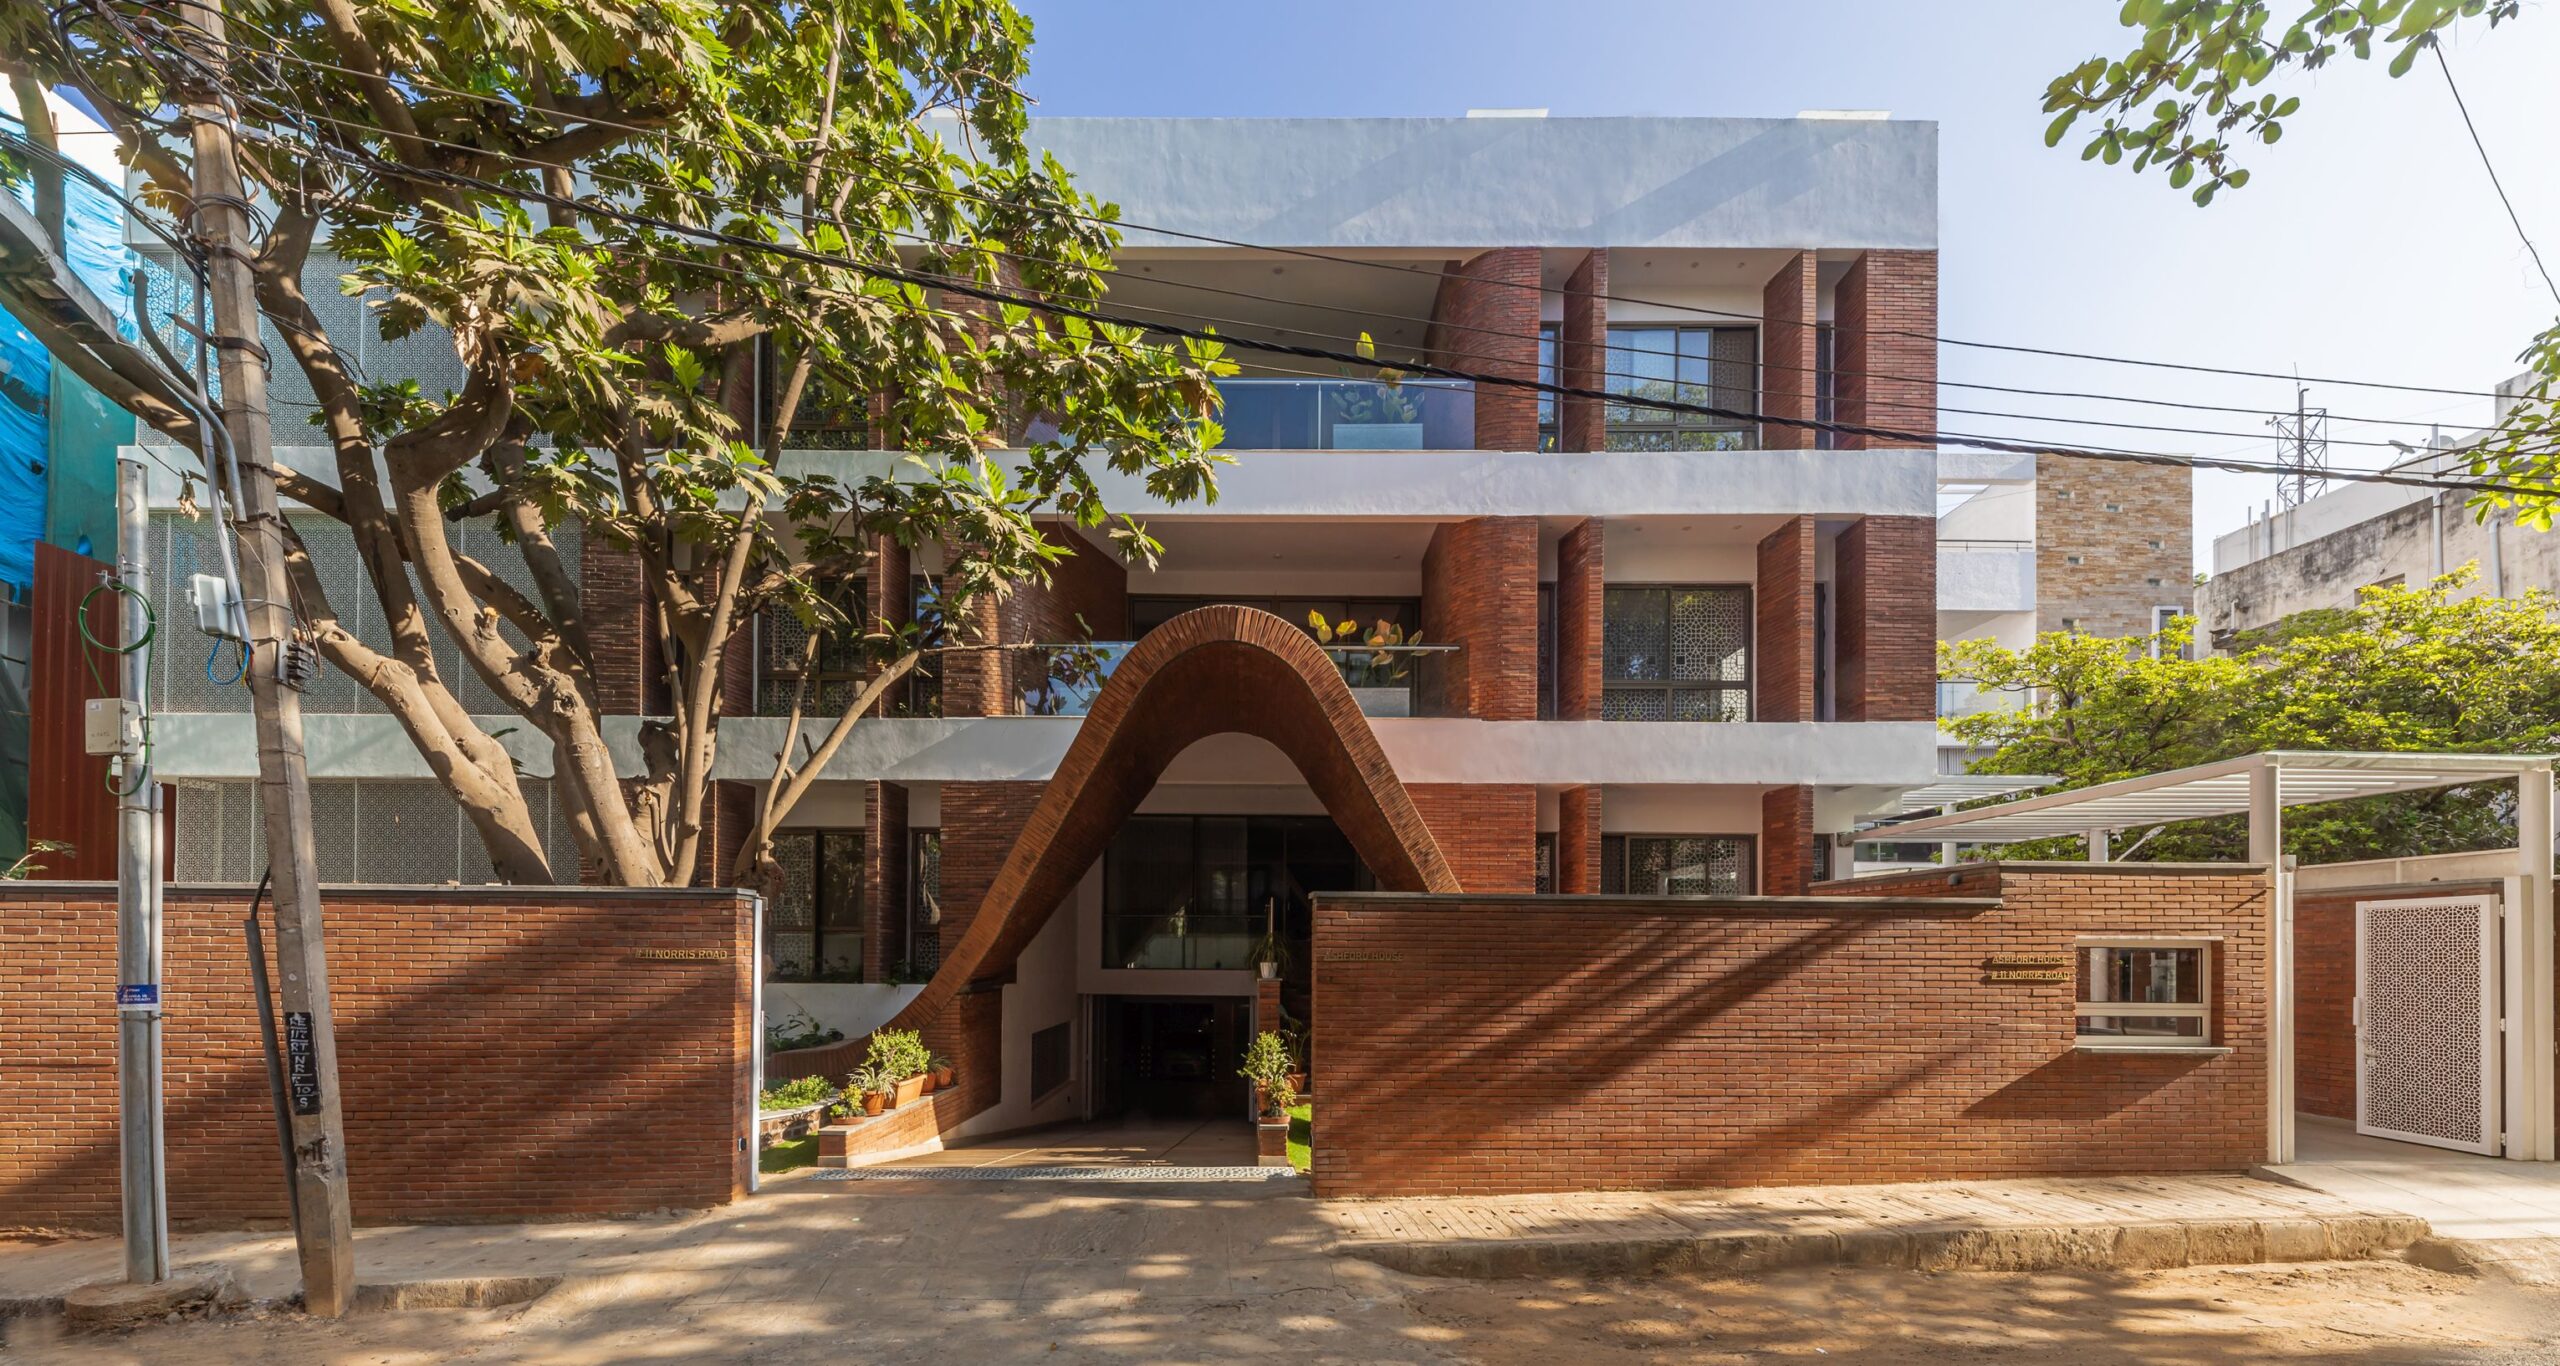 Norris Road Apartments, Bangalore by The Purple Ink Studio